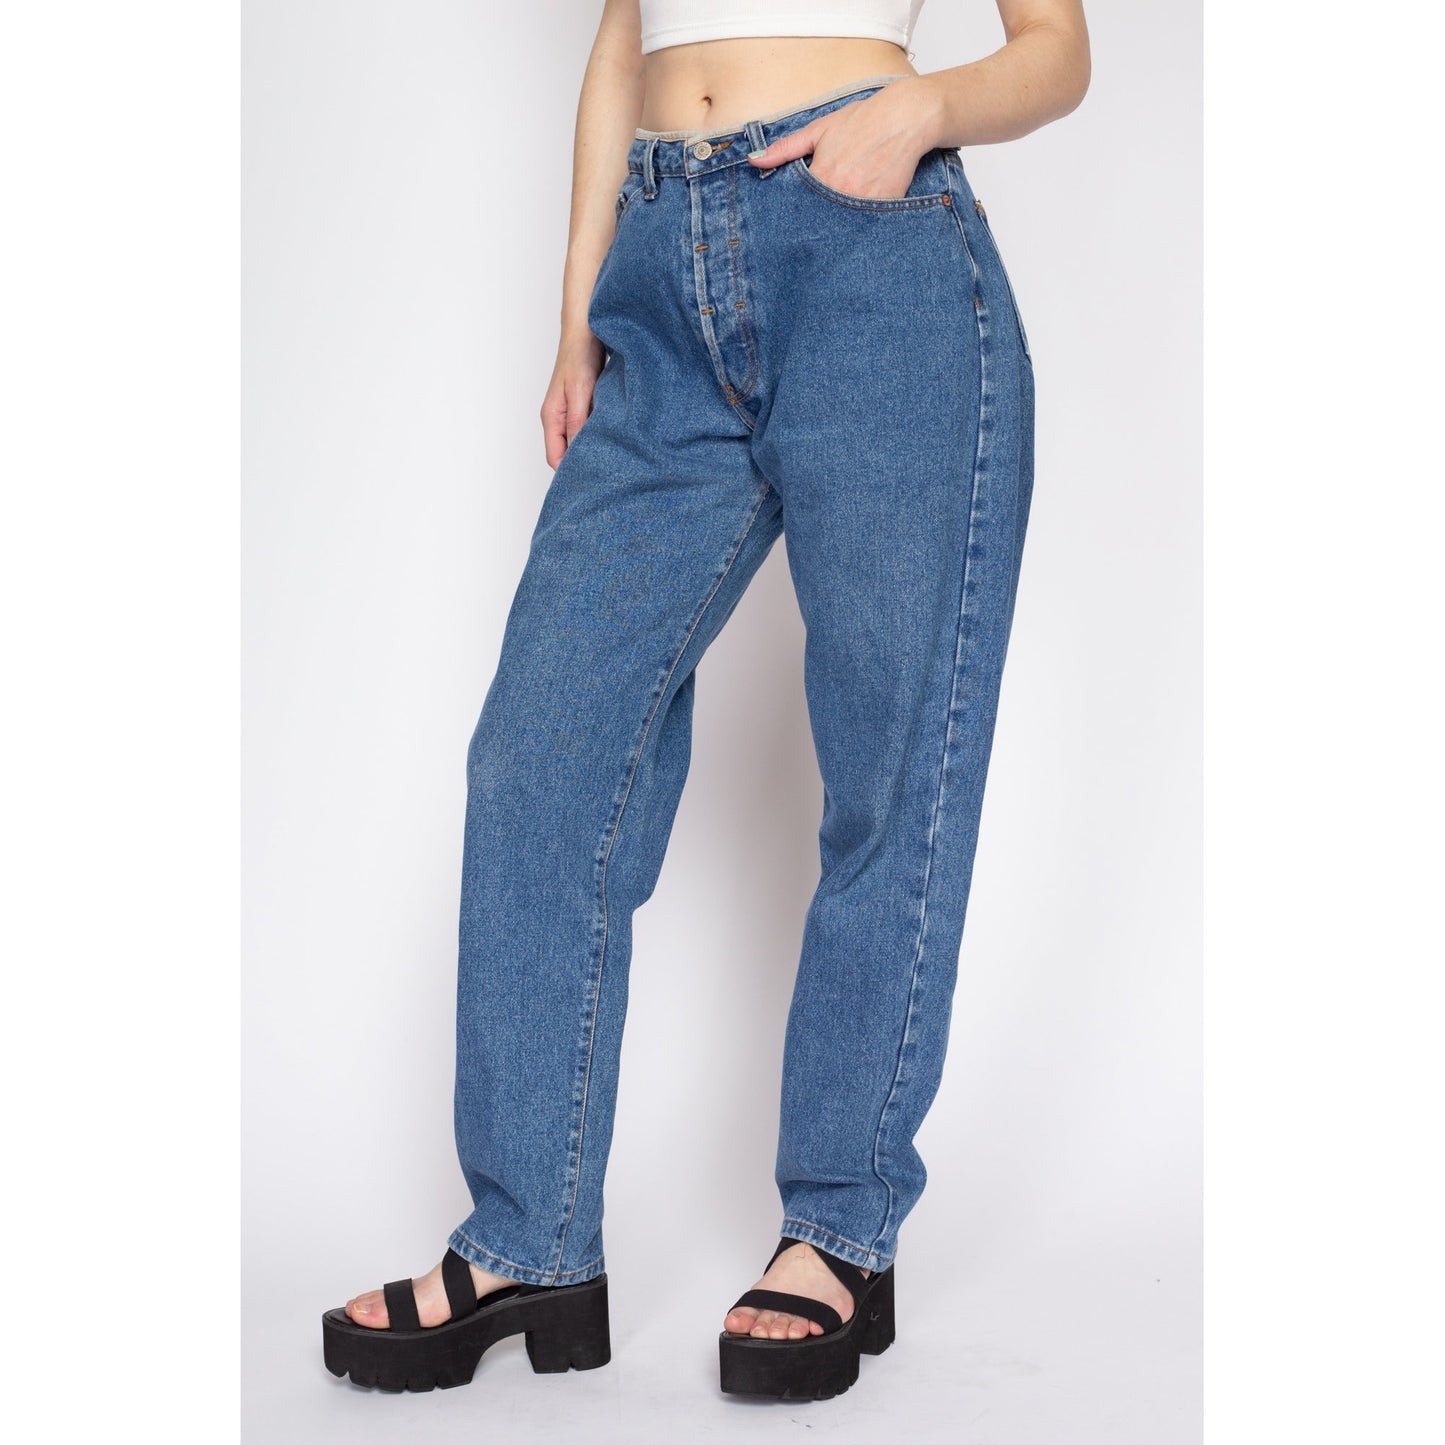 Large 90s Calvin Klein High Waisted Mom Jeans 31" | Vintage CK Denim Curvy Hourglass Fit Tapered Leg Jeans